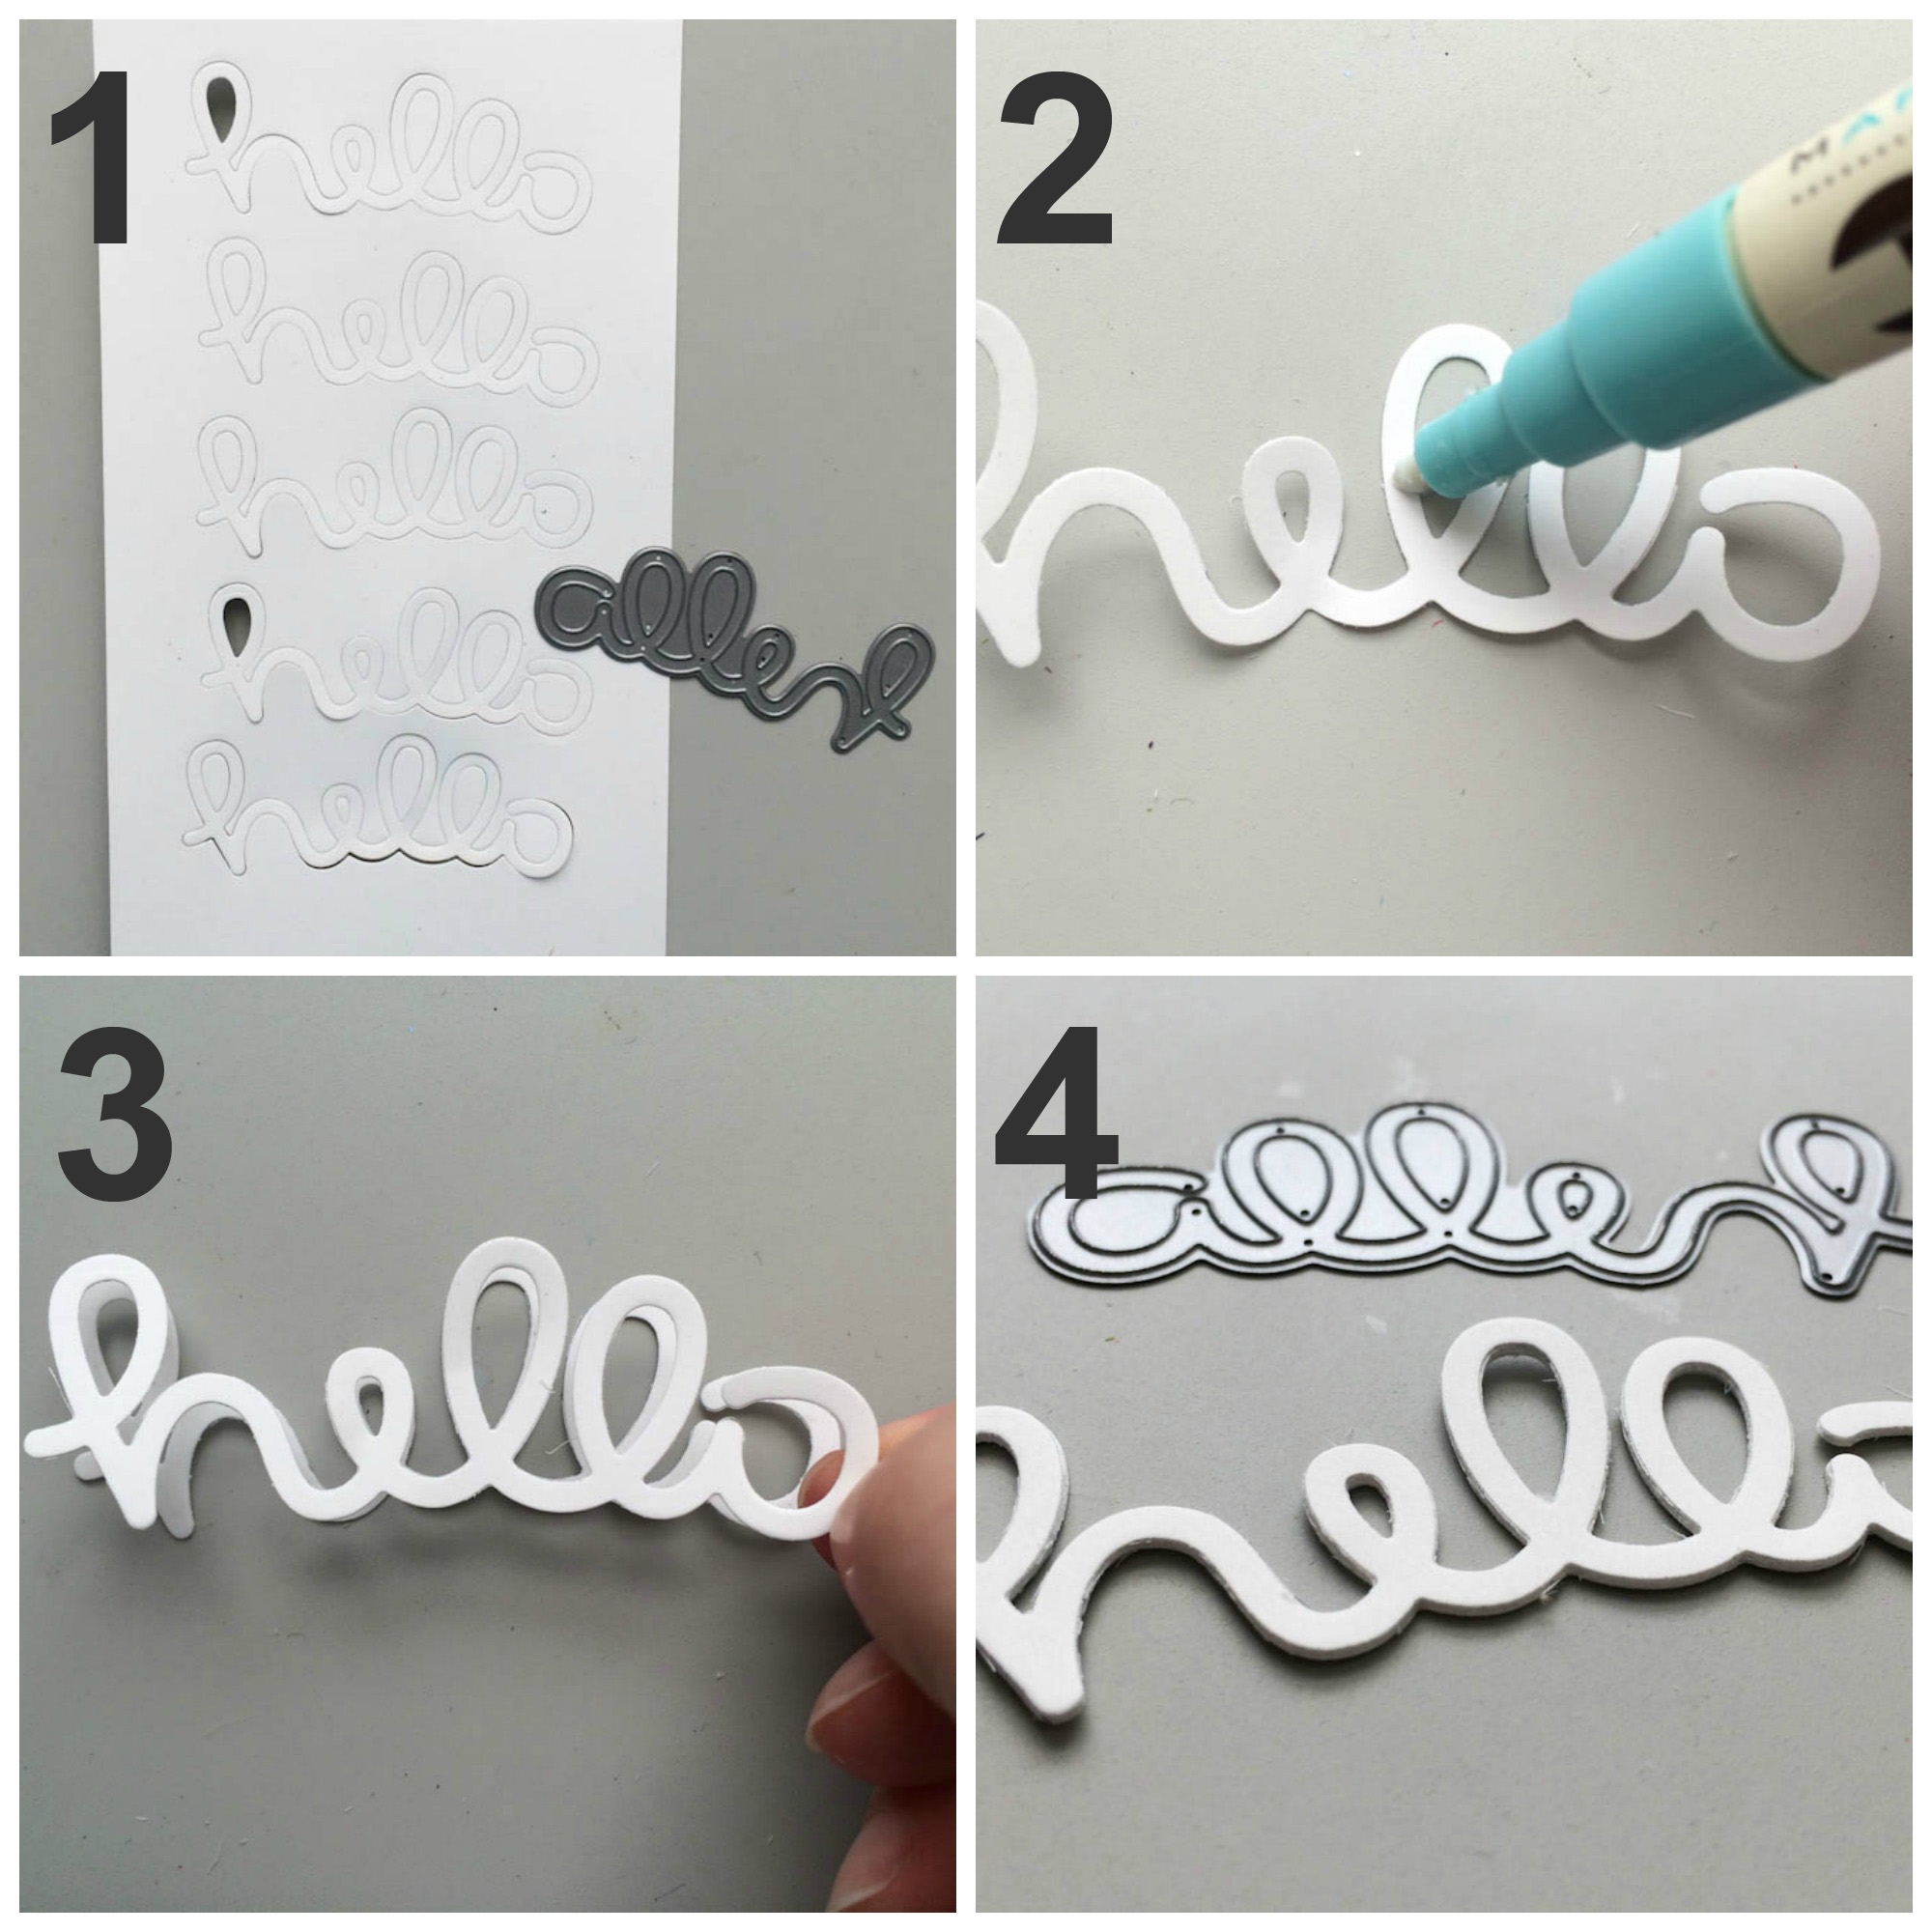 Die Cut Tips: Create your own chipboard